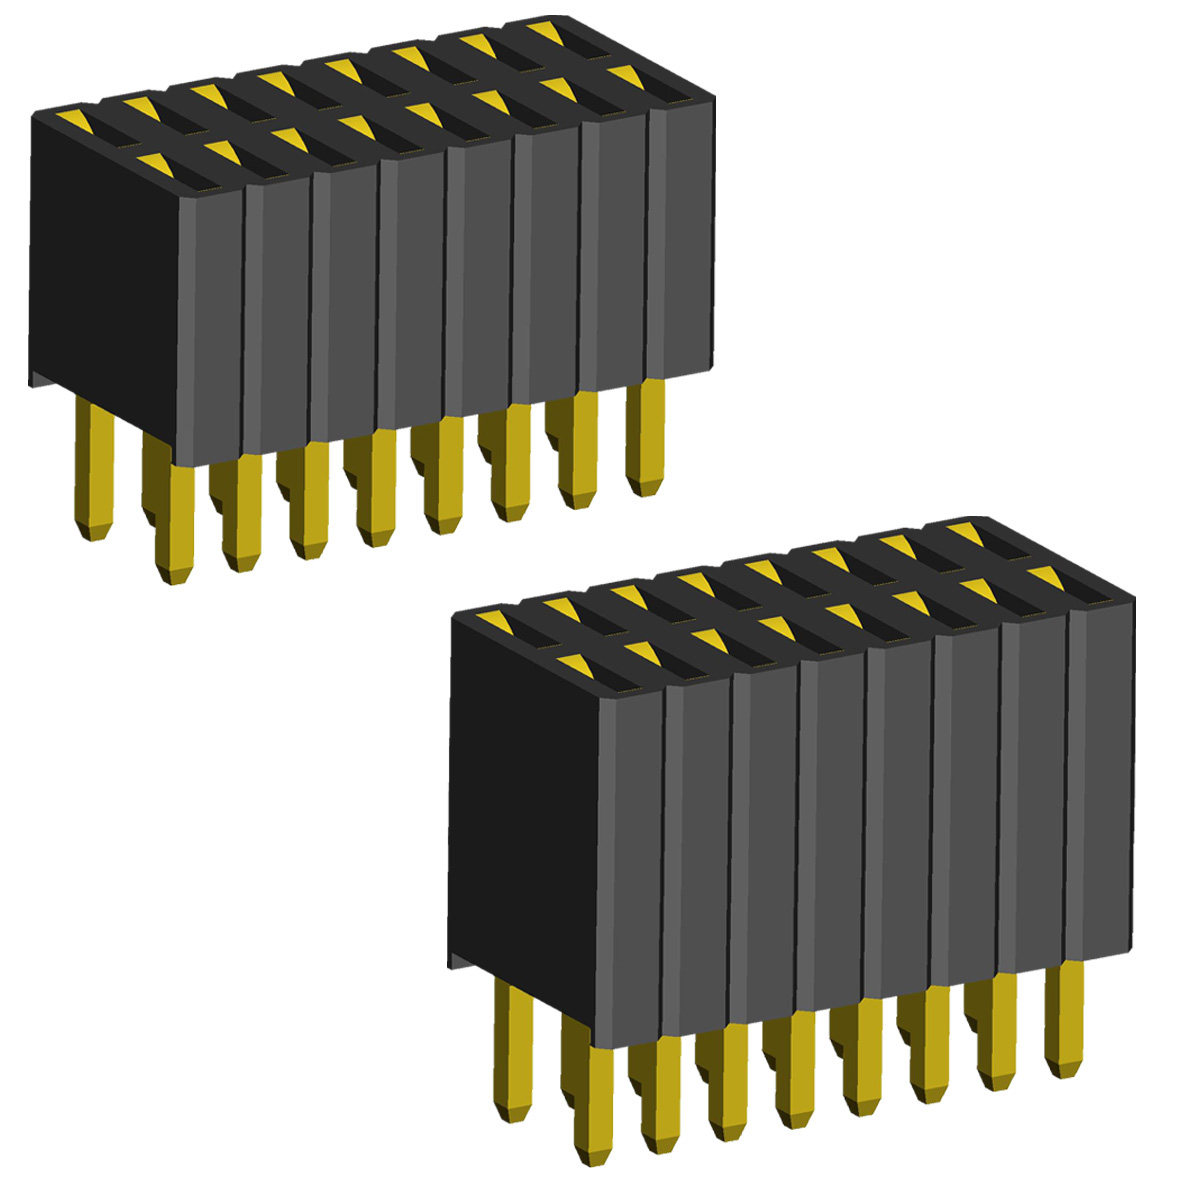 Open pin headers and Sockets for its, PCB/PCB (Board-to-Board) types with pitch 1,27x2,54 Pitch between pins in one row and sockets for them